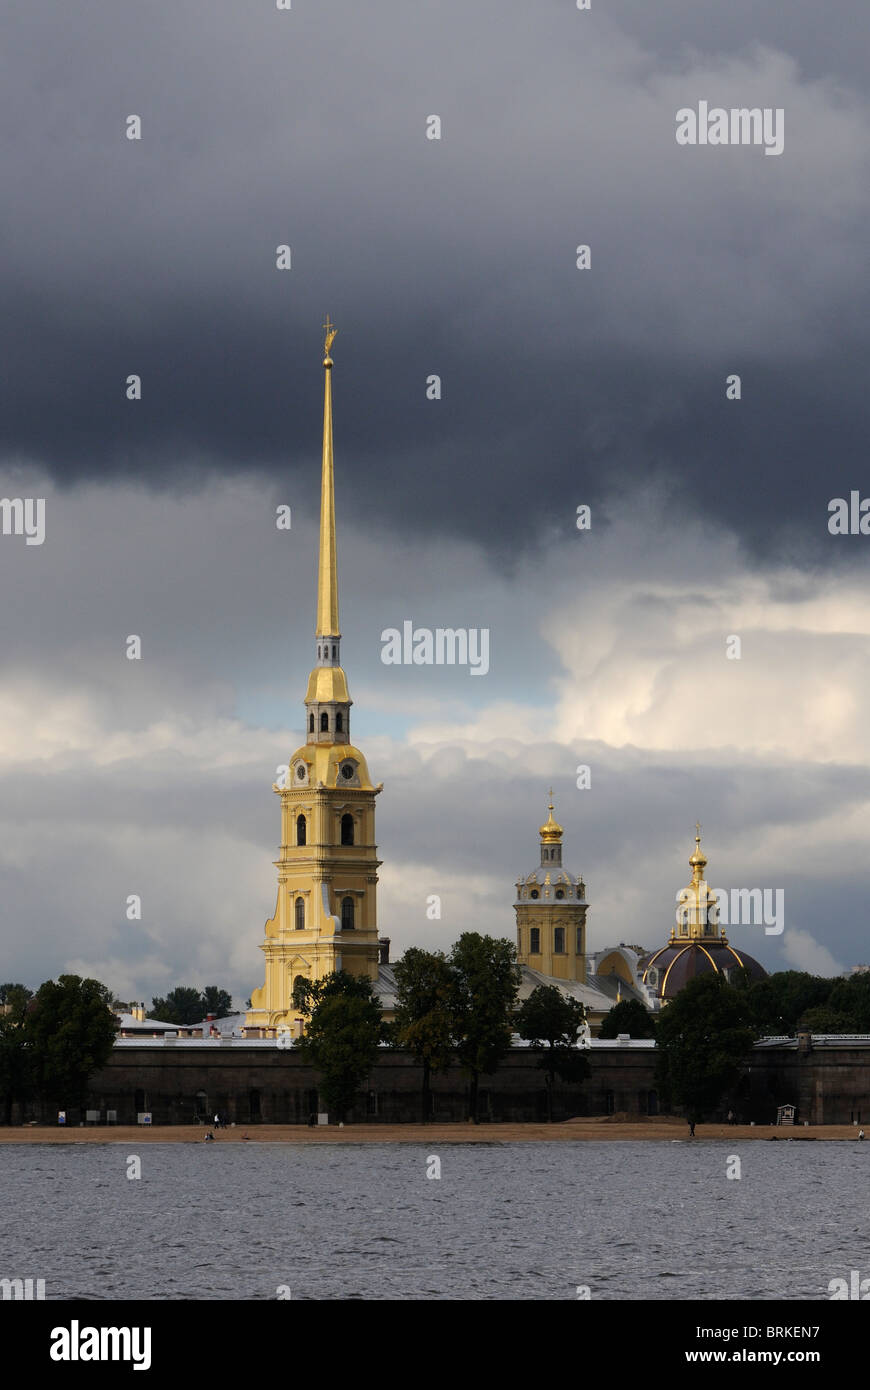 The golden spire and dome of Peter and Paul Cathedral viewed across the Neva River on a stormy afternoon. St Petersburg, Russia. Stock Photo